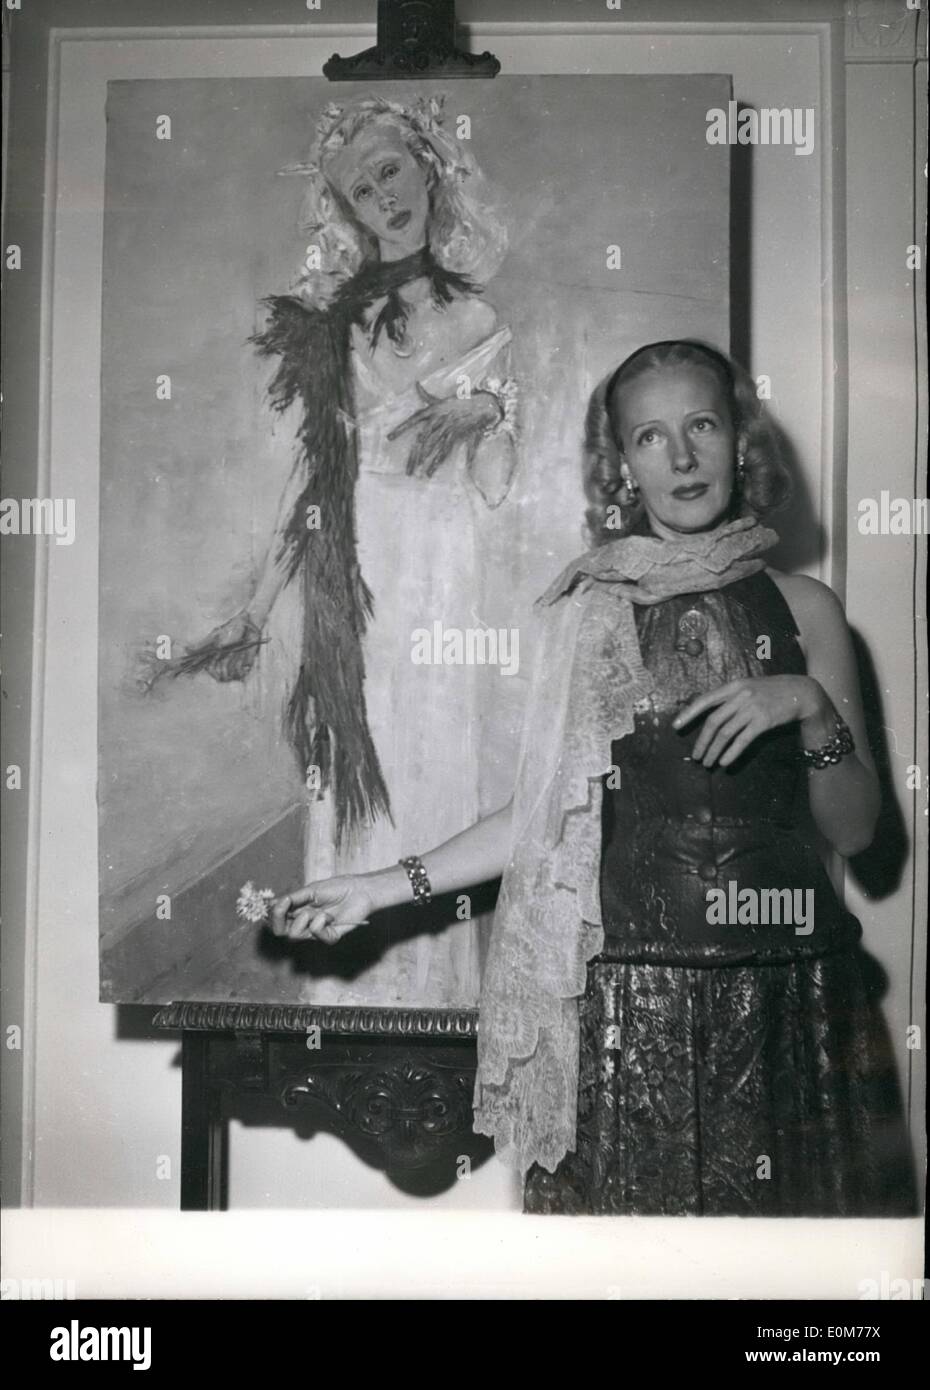 Nov. 11, 1953 - Gabriel Marcel's Latest Play Shortly At The Vieux Colombier: The Theatre Of The Vieux Colombier In Paris Will Present Shortly ''Le Chemin Des Cretes'' The Latest Play Written By Gabriel Marcel. Madeleine Ozeray Who Plays The Main Part Is Seen Here Photographed Next To Her Portrait Painted By Framcoise Adnte Who Has Decorated ''Le Chemin Des Cretes' Stock Photo